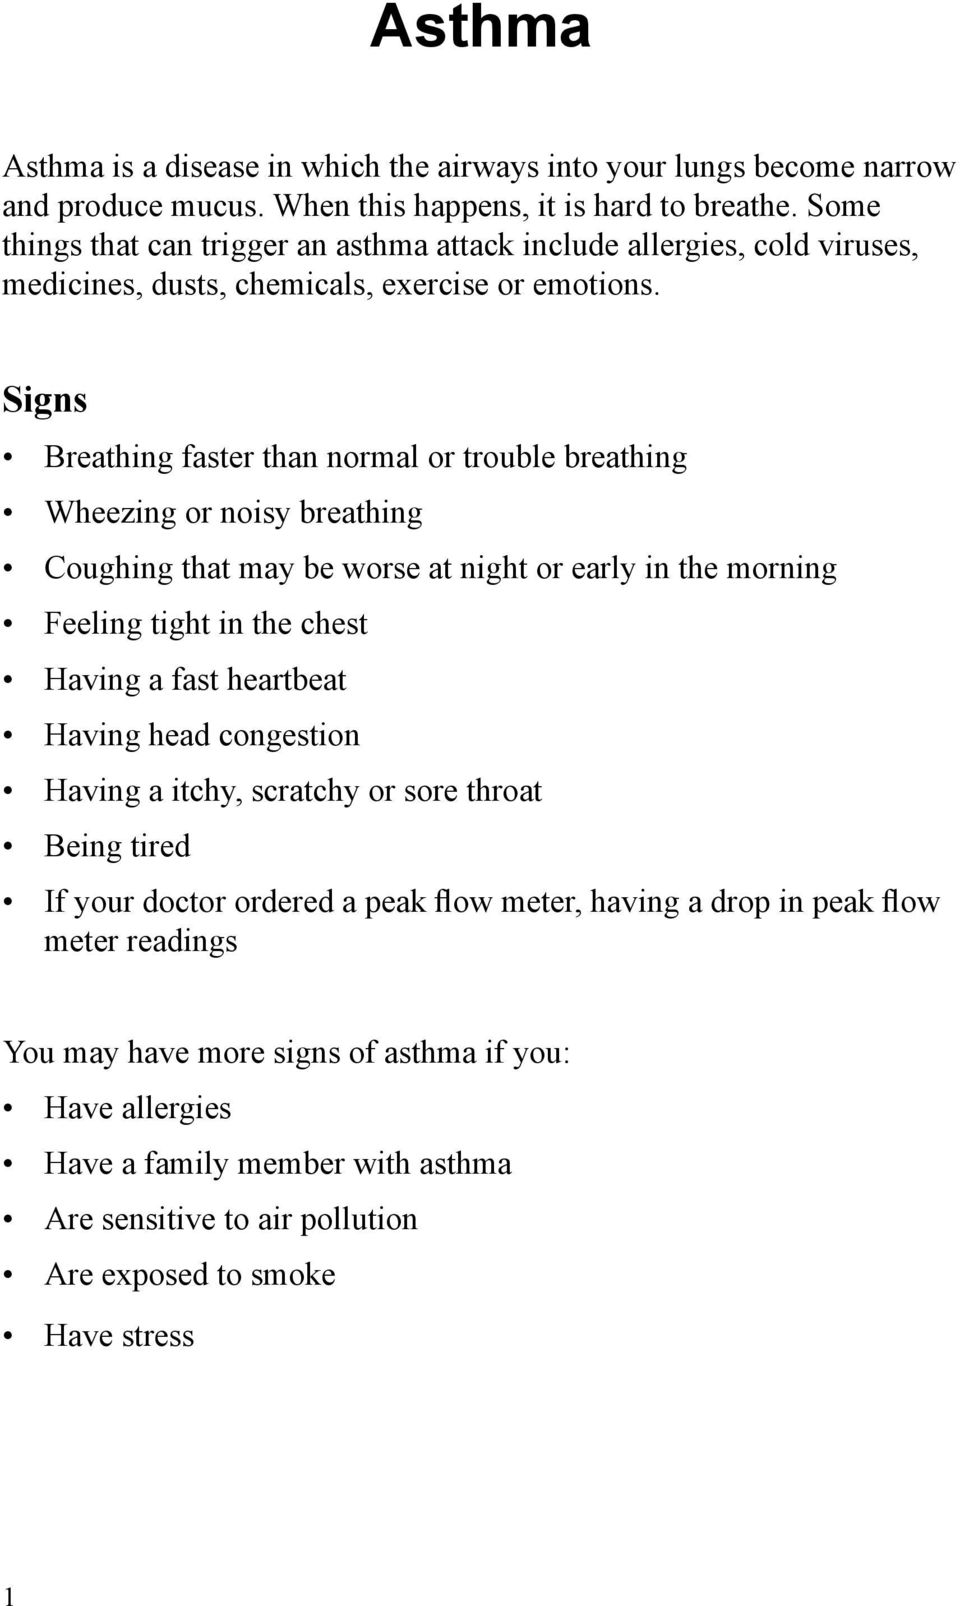 Signs Breathing faster than normal or trouble breathing Wheezing or noisy breathing Coughing that may be worse at night or early in the morning Feeling tight in the chest Having a fast heartbeat